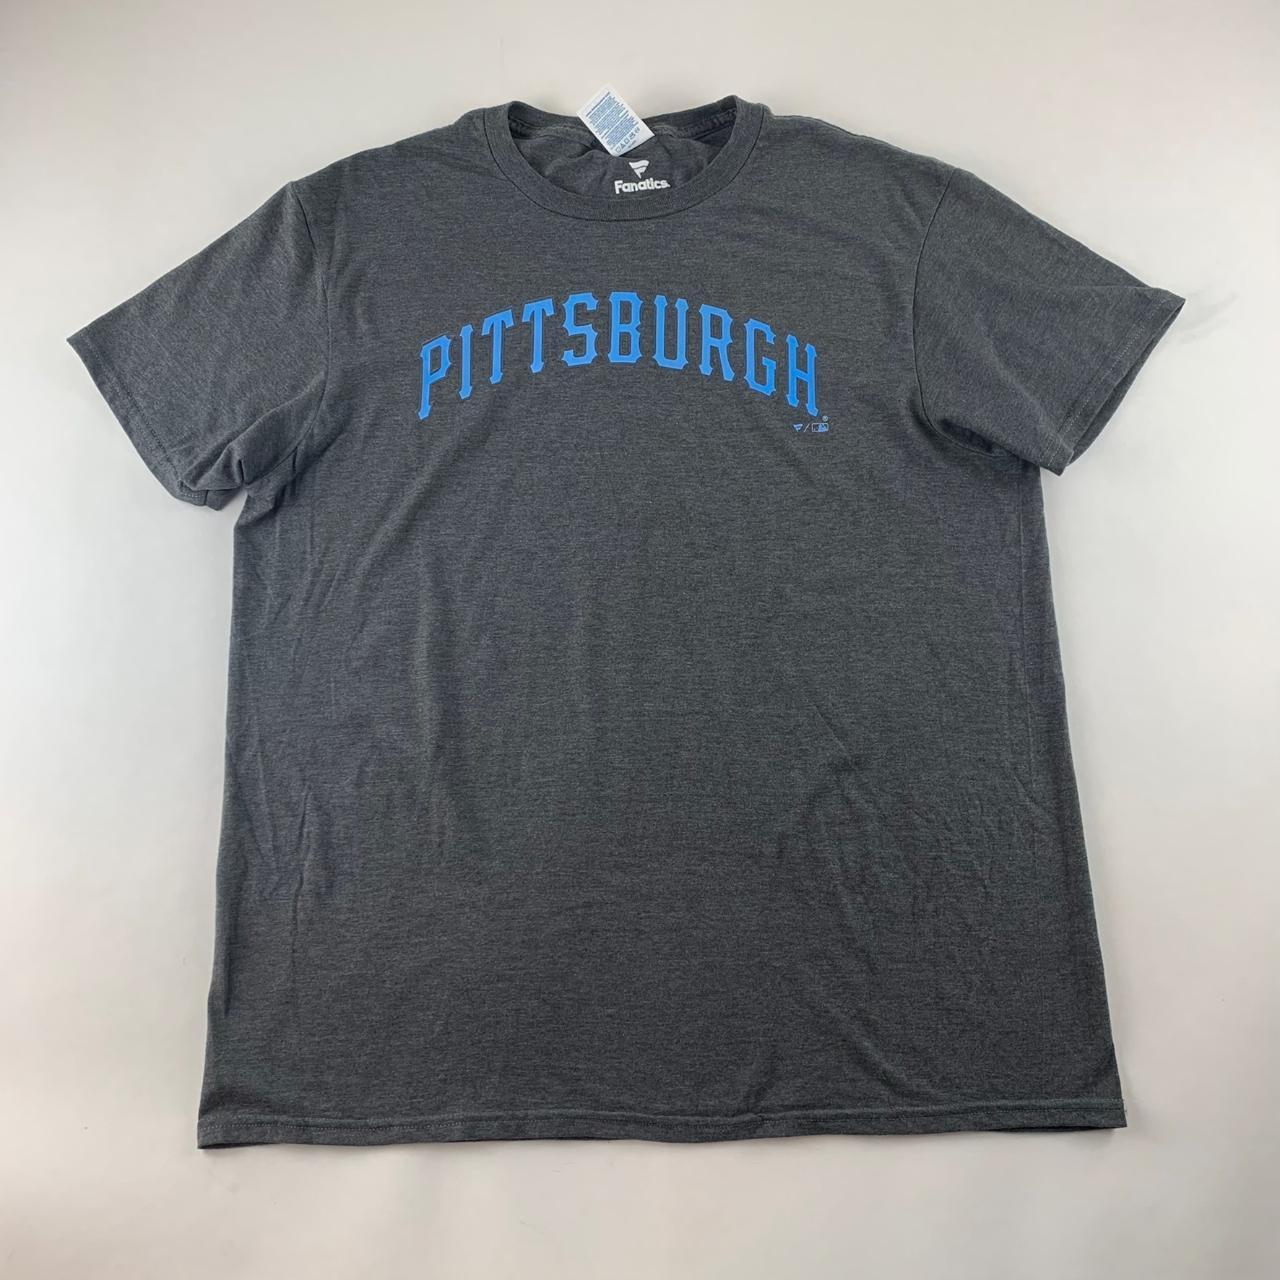 For Sale: Item Name: Pittsburgh Pirates MLB Fathers - Depop